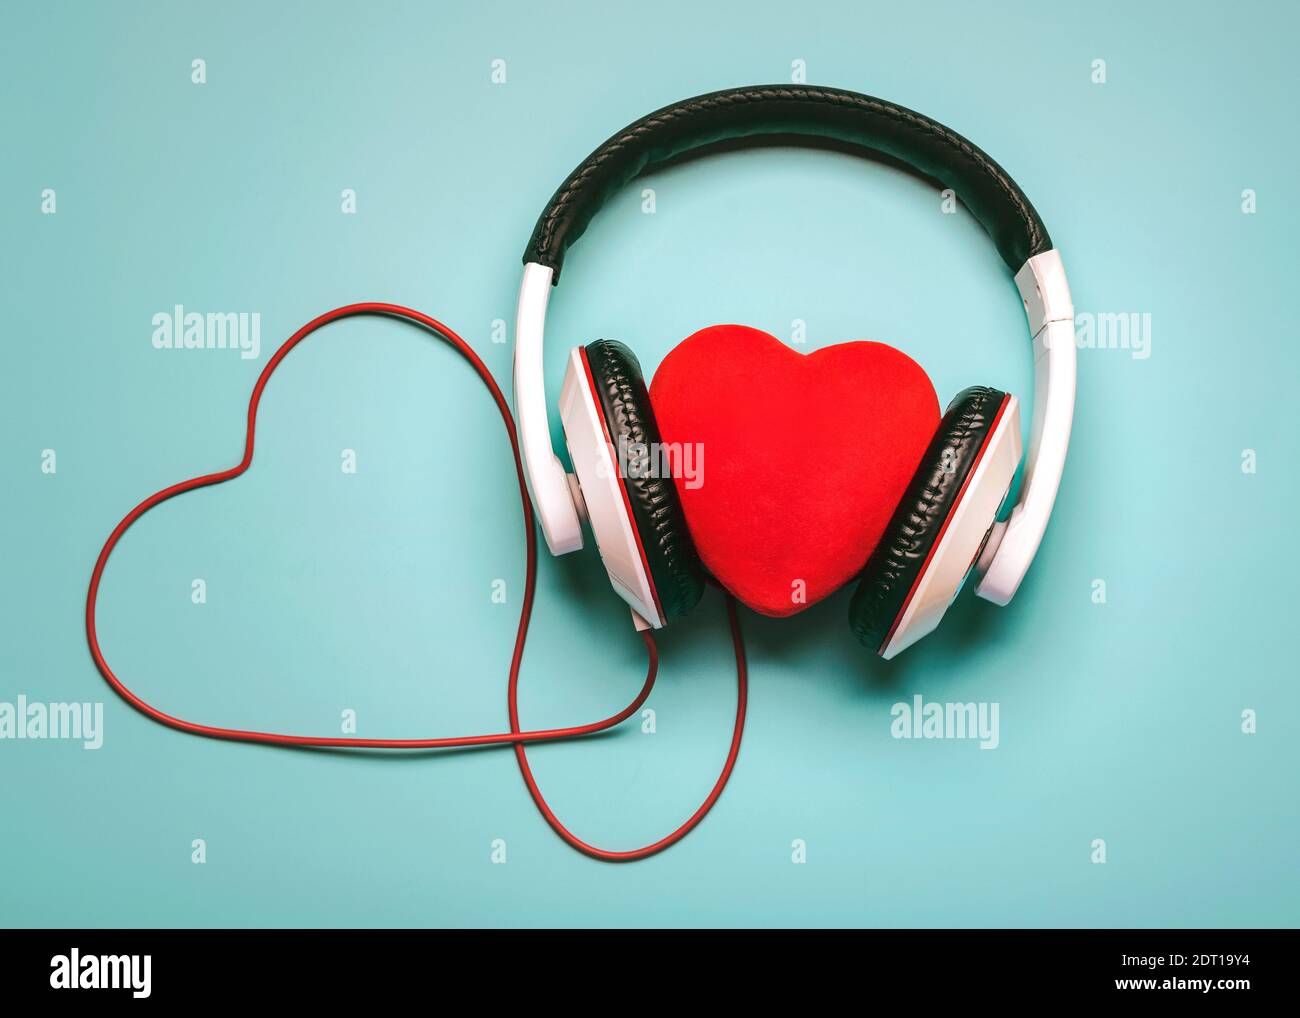 heart with headphones and red heart-shaped clable on a blue background.Romantic music concept Stock Photo